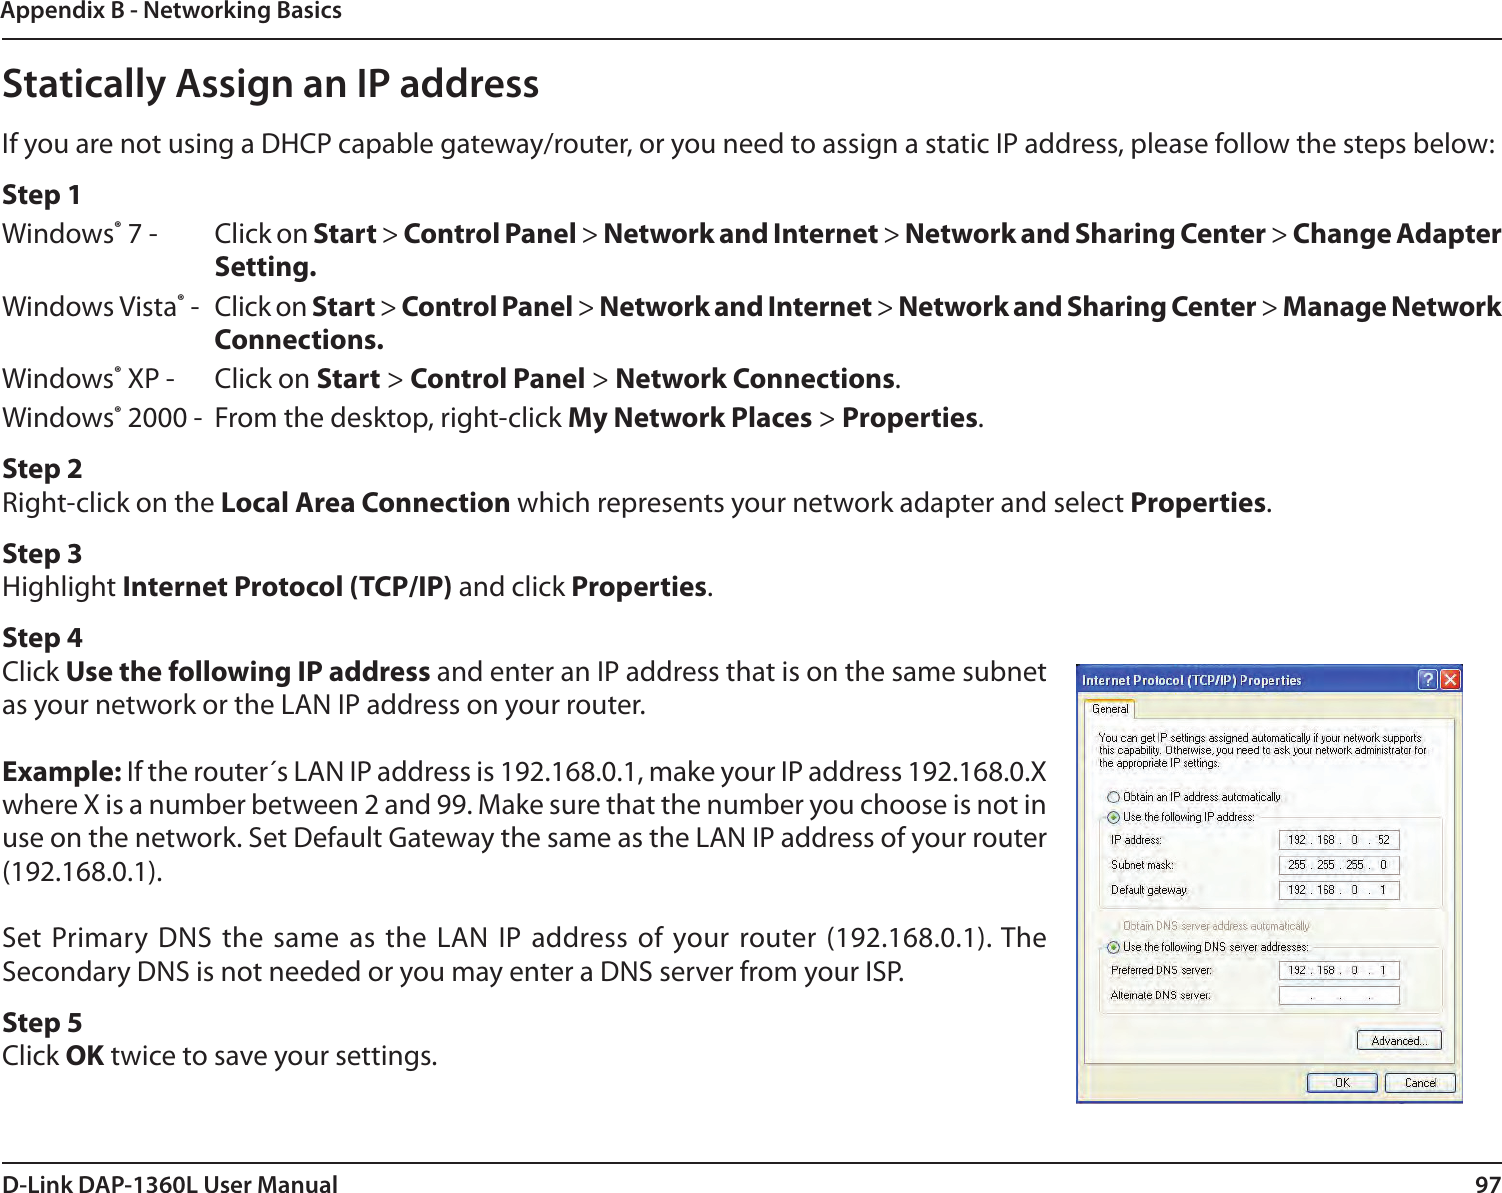 97D-Link DAP-1360L User ManualAppendix B - Networking BasicsStatically Assign an IP addressIf you are not using a DHCP capable gateway/router, or you need to assign a static IP address, please follow the steps below:Step 1Windows® 7 -  Click on Start &gt; Control Panel &gt; Network and Internet &gt; Network and Sharing Center &gt; Change Adapter Setting. Windows Vista® -  Click on Start &gt; Control Panel &gt; Network and Internet &gt; Network and Sharing Center &gt; Manage Network Connections.Windows® XP -  Click on Start &gt; Control Panel &gt; Network Connections.Windows® 2000 -  From the desktop, right-click My Network Places &gt; Properties.Step 2Right-click on the Local Area Connection which represents your network adapter and select Properties.Step 3Highlight Internet Protocol (TCP/IP) and click Properties.Step 4Click Use the following IP address and enter an IP address that is on the same subnet as your network or the LAN IP address on your router.Example: If the router´s LAN IP address is 192.168.0.1, make your IP address 192.168.0.X where X is a number between 2 and 99. Make sure that the number you choose is not in use on the network. Set Default Gateway the same as the LAN IP address of your router (192.168.0.1). Set Primary DNS  the  same  as the  LAN  IP  address  of your  router  (192.168.0.1). The Secondary DNS is not needed or you may enter a DNS server from your ISP.Step 5Click OK twice to save your settings.